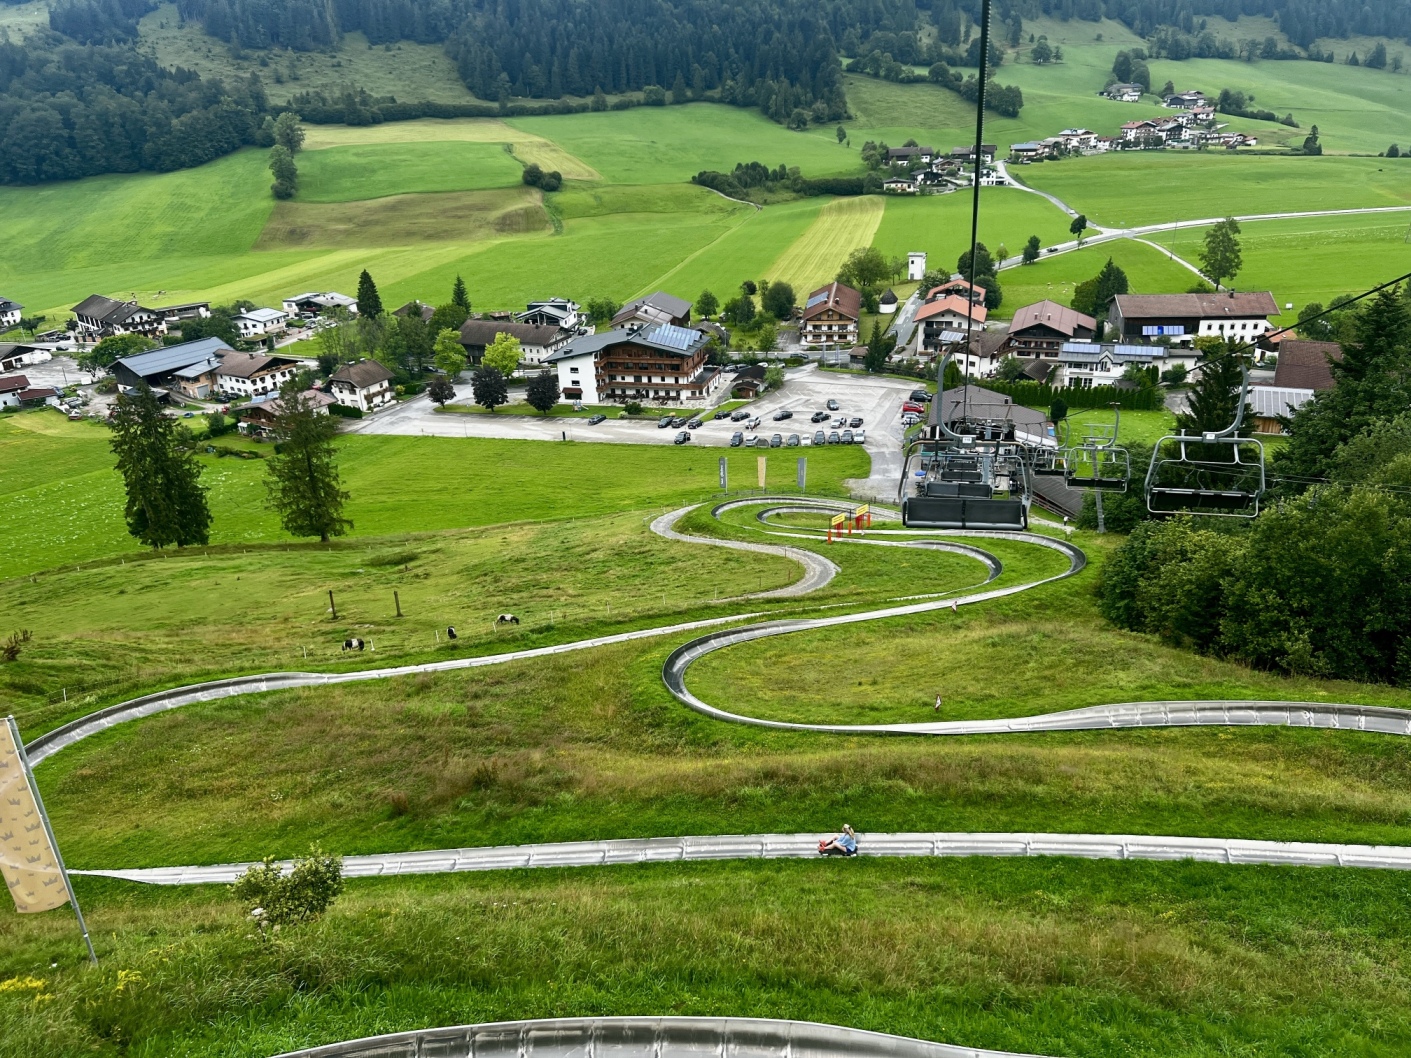 A winding toboggan run leads down a grassy hill, with the adventure mountain railway chairlift running alongside it. Below lies a small village with various buildings and parked cars in a green valley, surrounded by trees and hills, against the majestic backdrop of the Zahmer Kaiser.